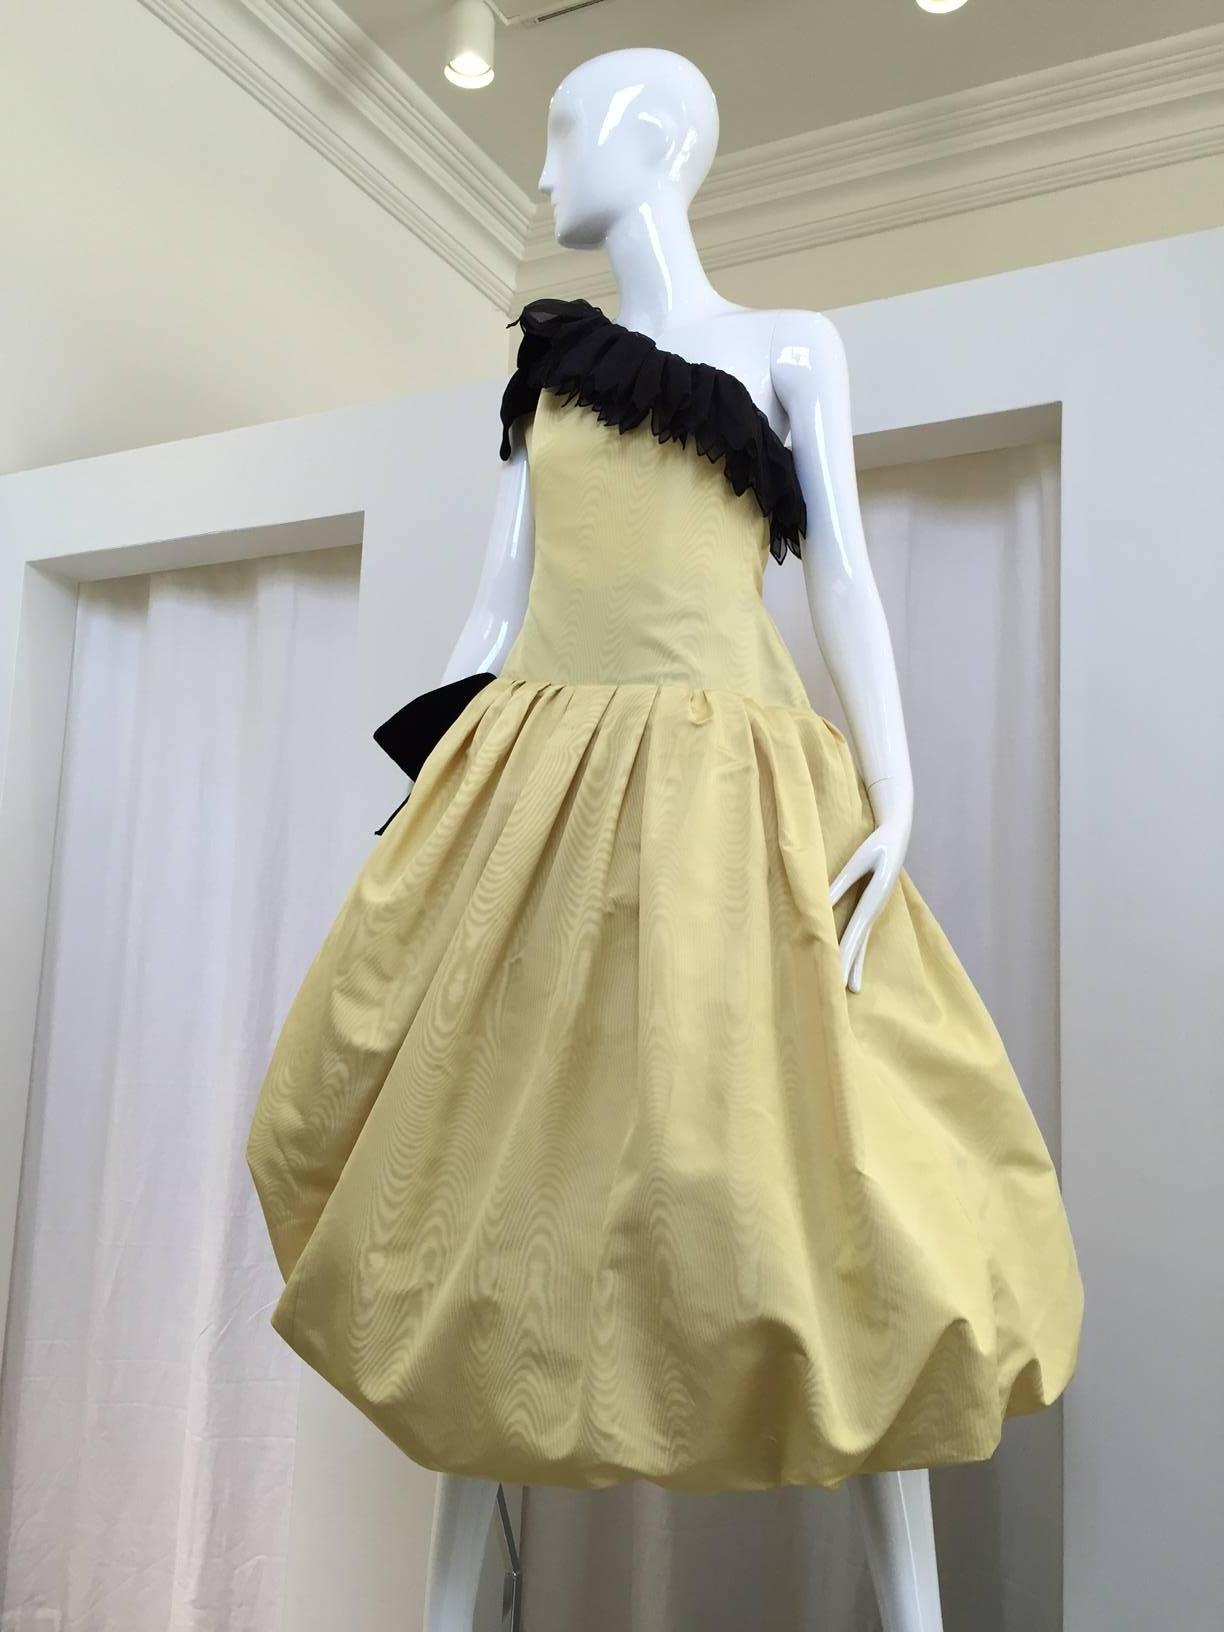 Women's Christian Dior by Marc Bohan Haute Couture 1982 
Yellow Silk Cocktail Dress For Sale